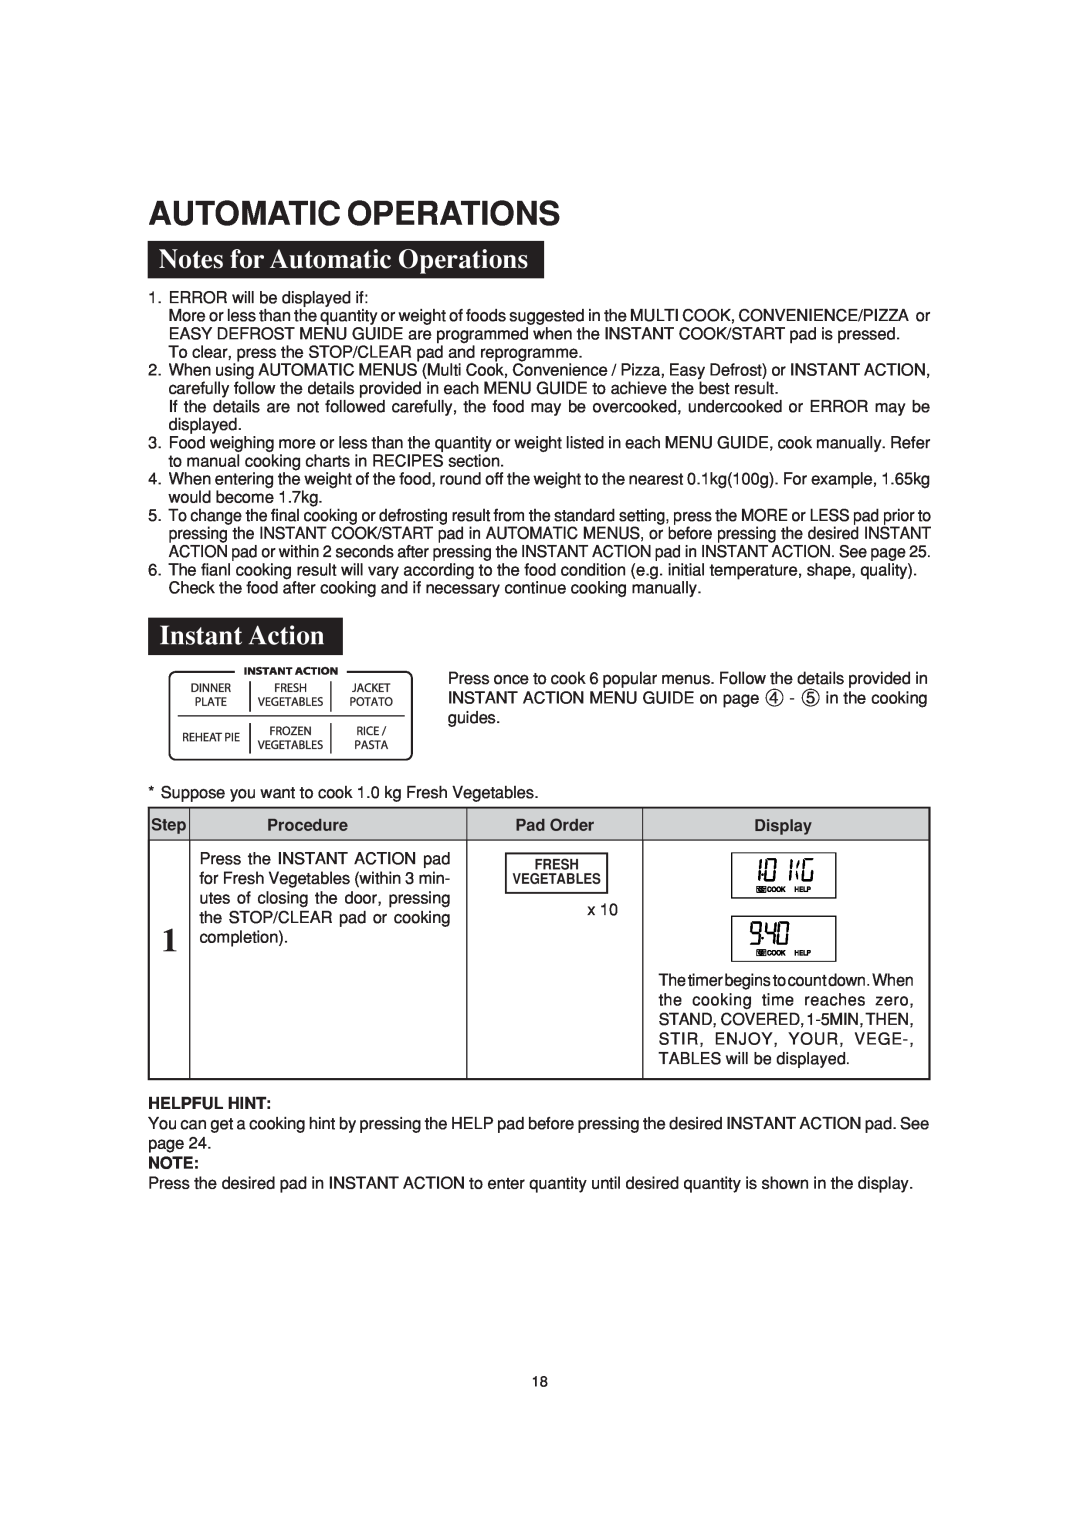 Sharp R-890N operation manual Notes for Automatic Operations, Instant Action 